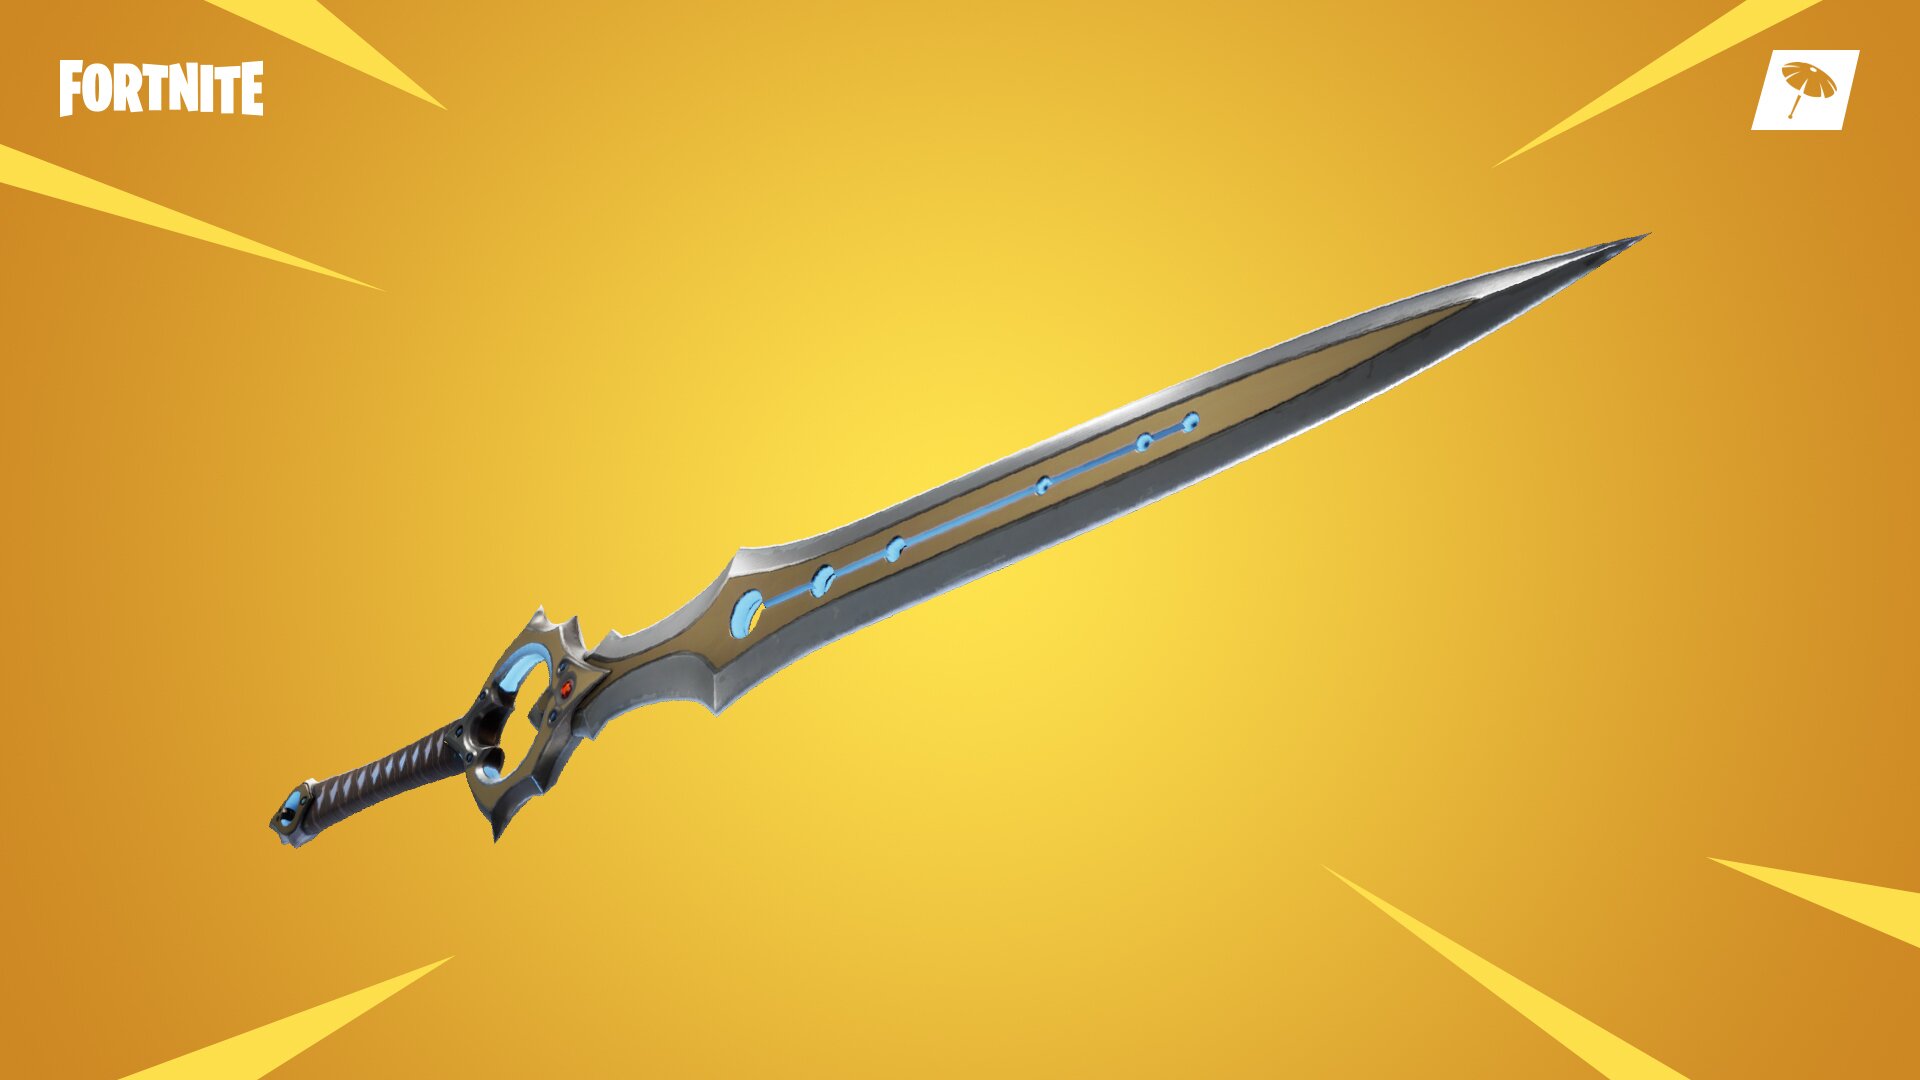 Epic Games made a mistake releasing the Infinity Blade - especially during the NA Fortnite Winter Royale tournament - but they owned up to the PR disaster.